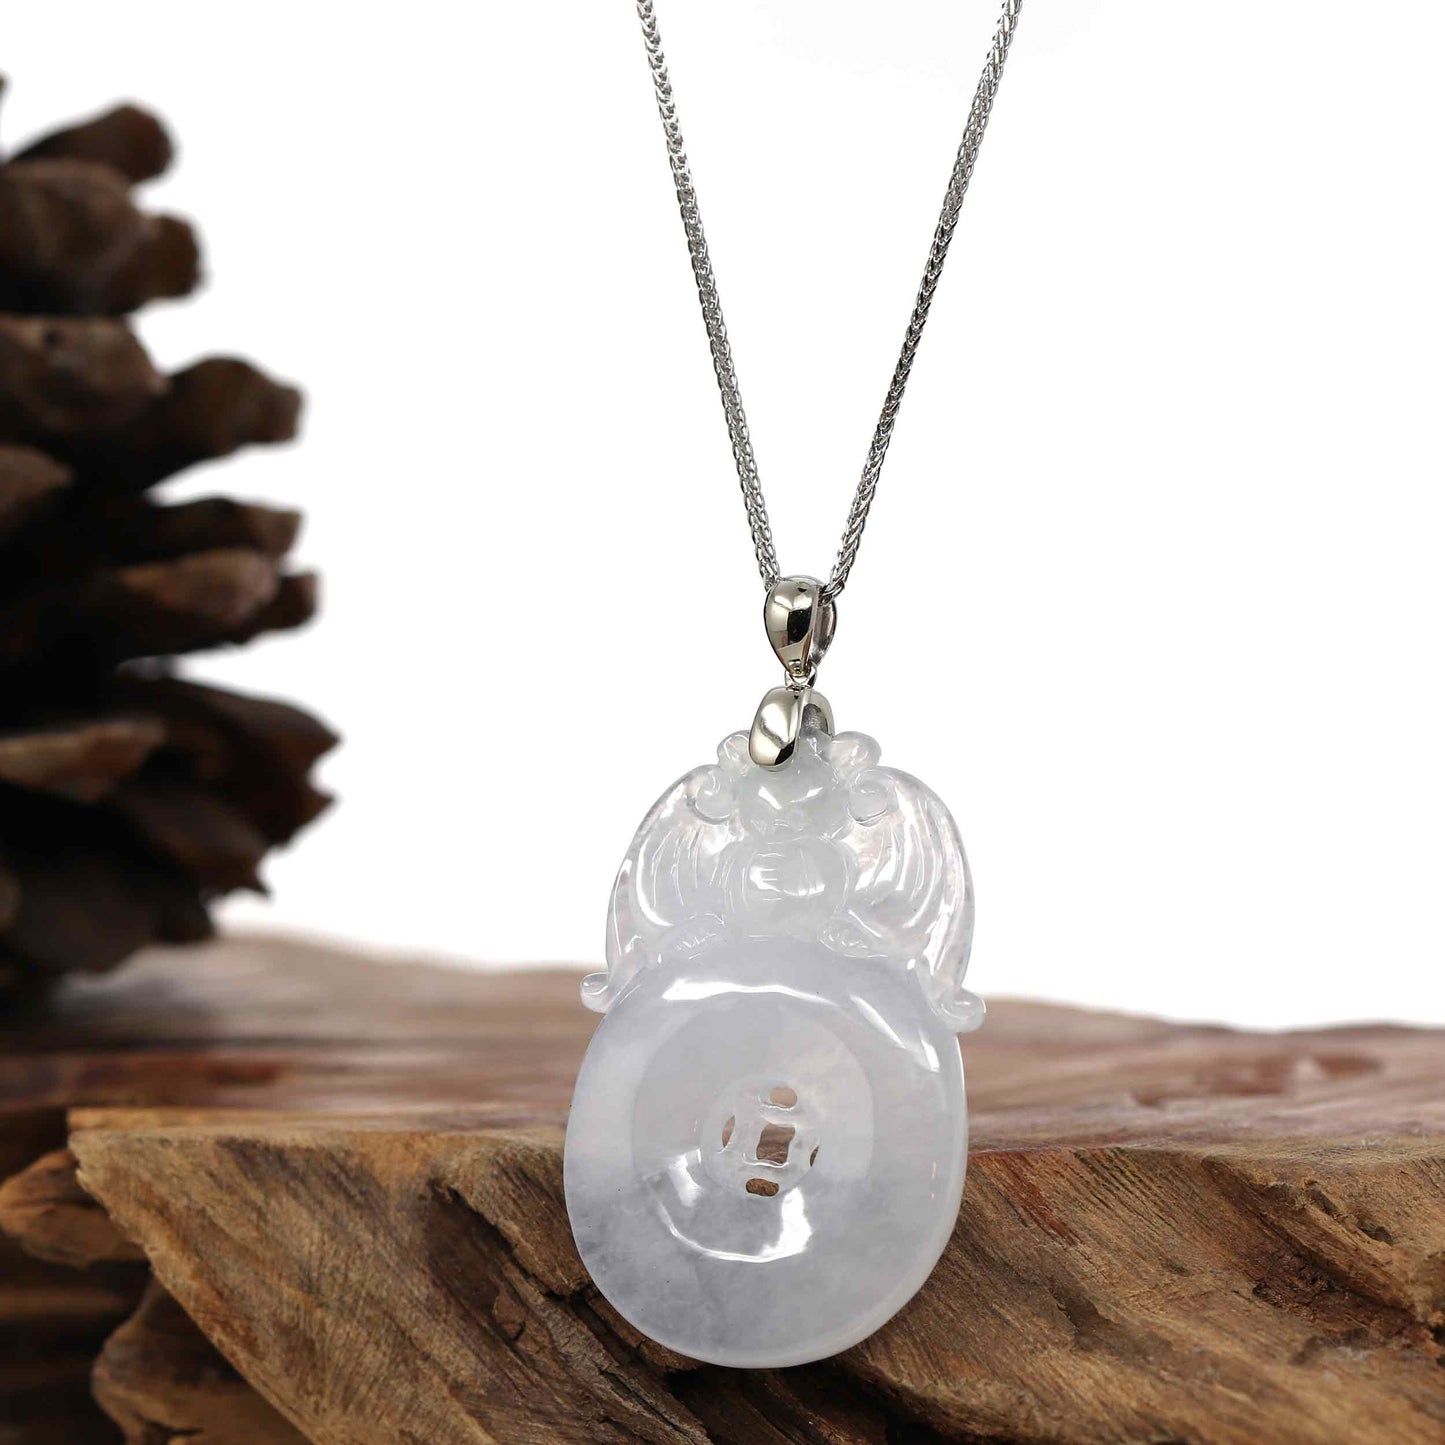 Load image into Gallery viewer, RealJade Co.¨ Jade Guanyin Pendant Necklace Genuine Ice White Jadeite Jade Fu Zai Yan Qian Pendant Necklace With 14K White Gold Bail
